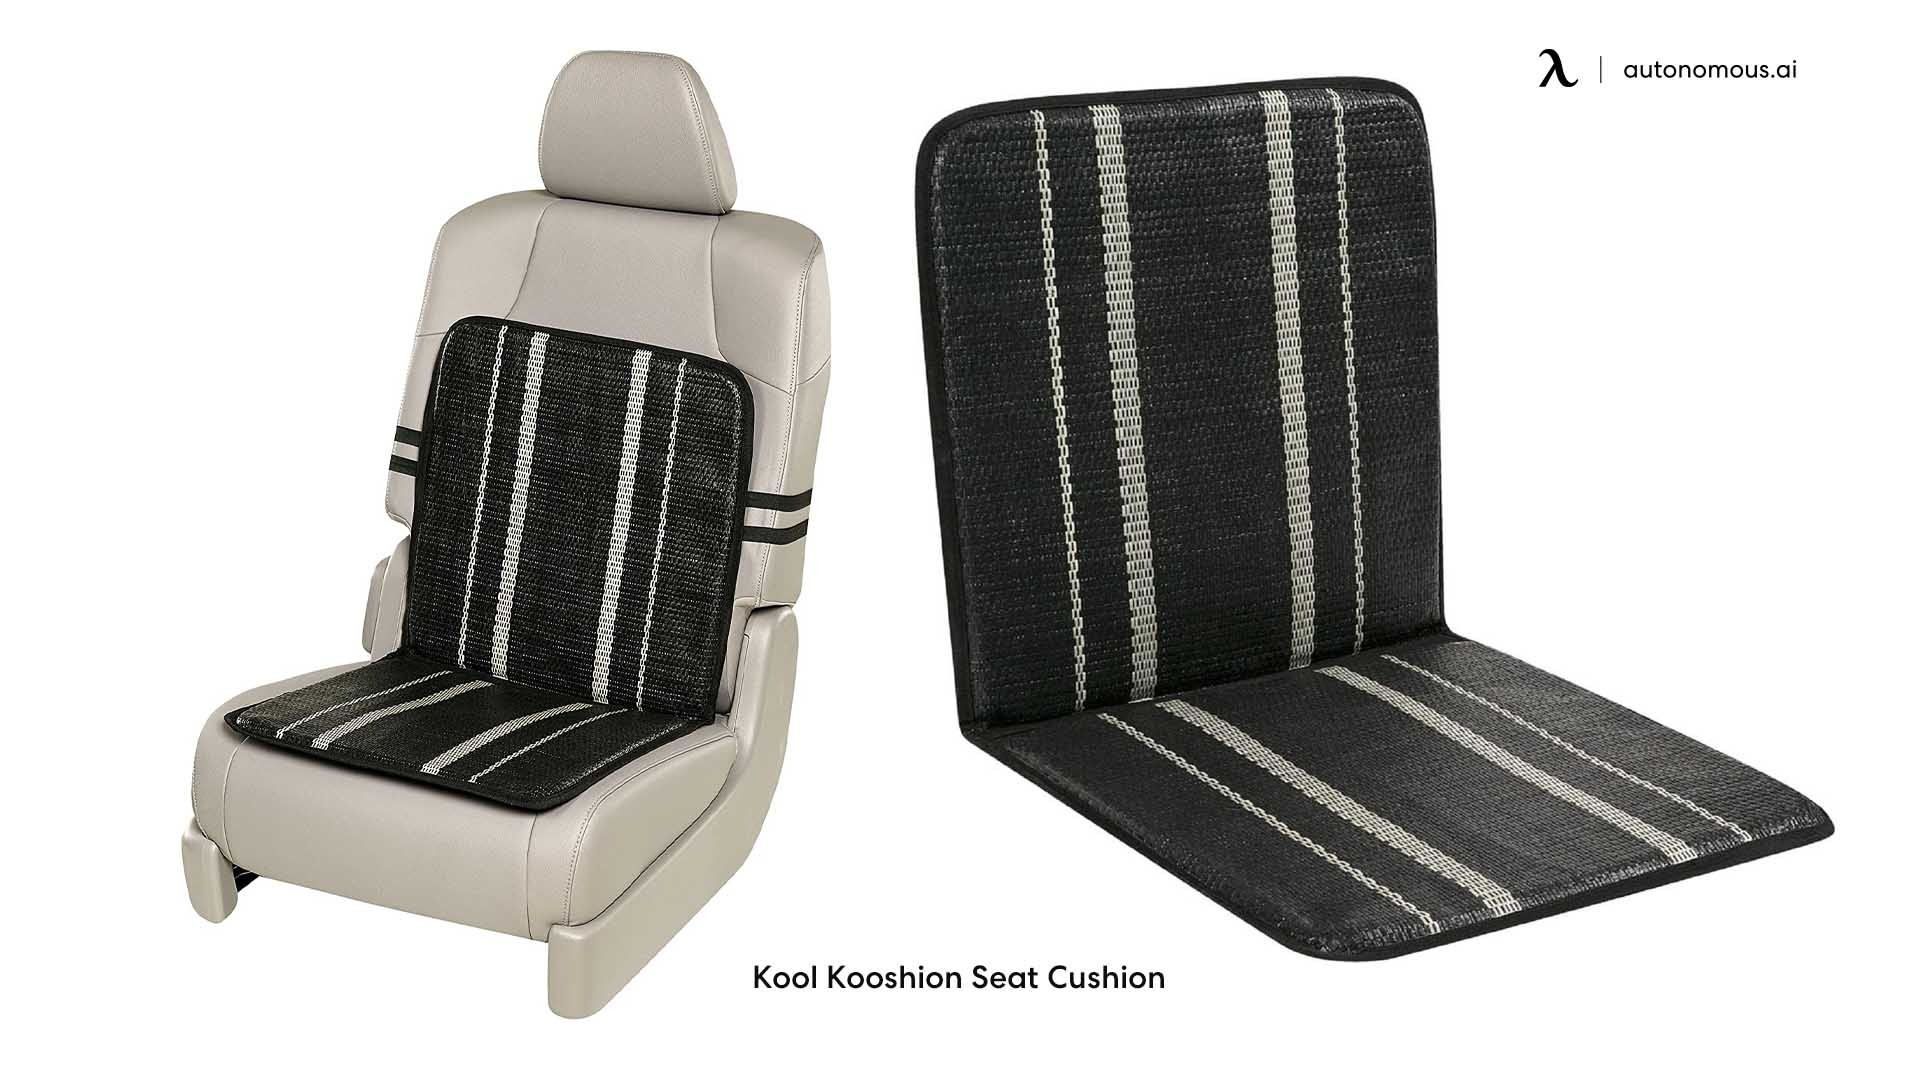 The Best Cooling Seat Cushion for Recliner 2023